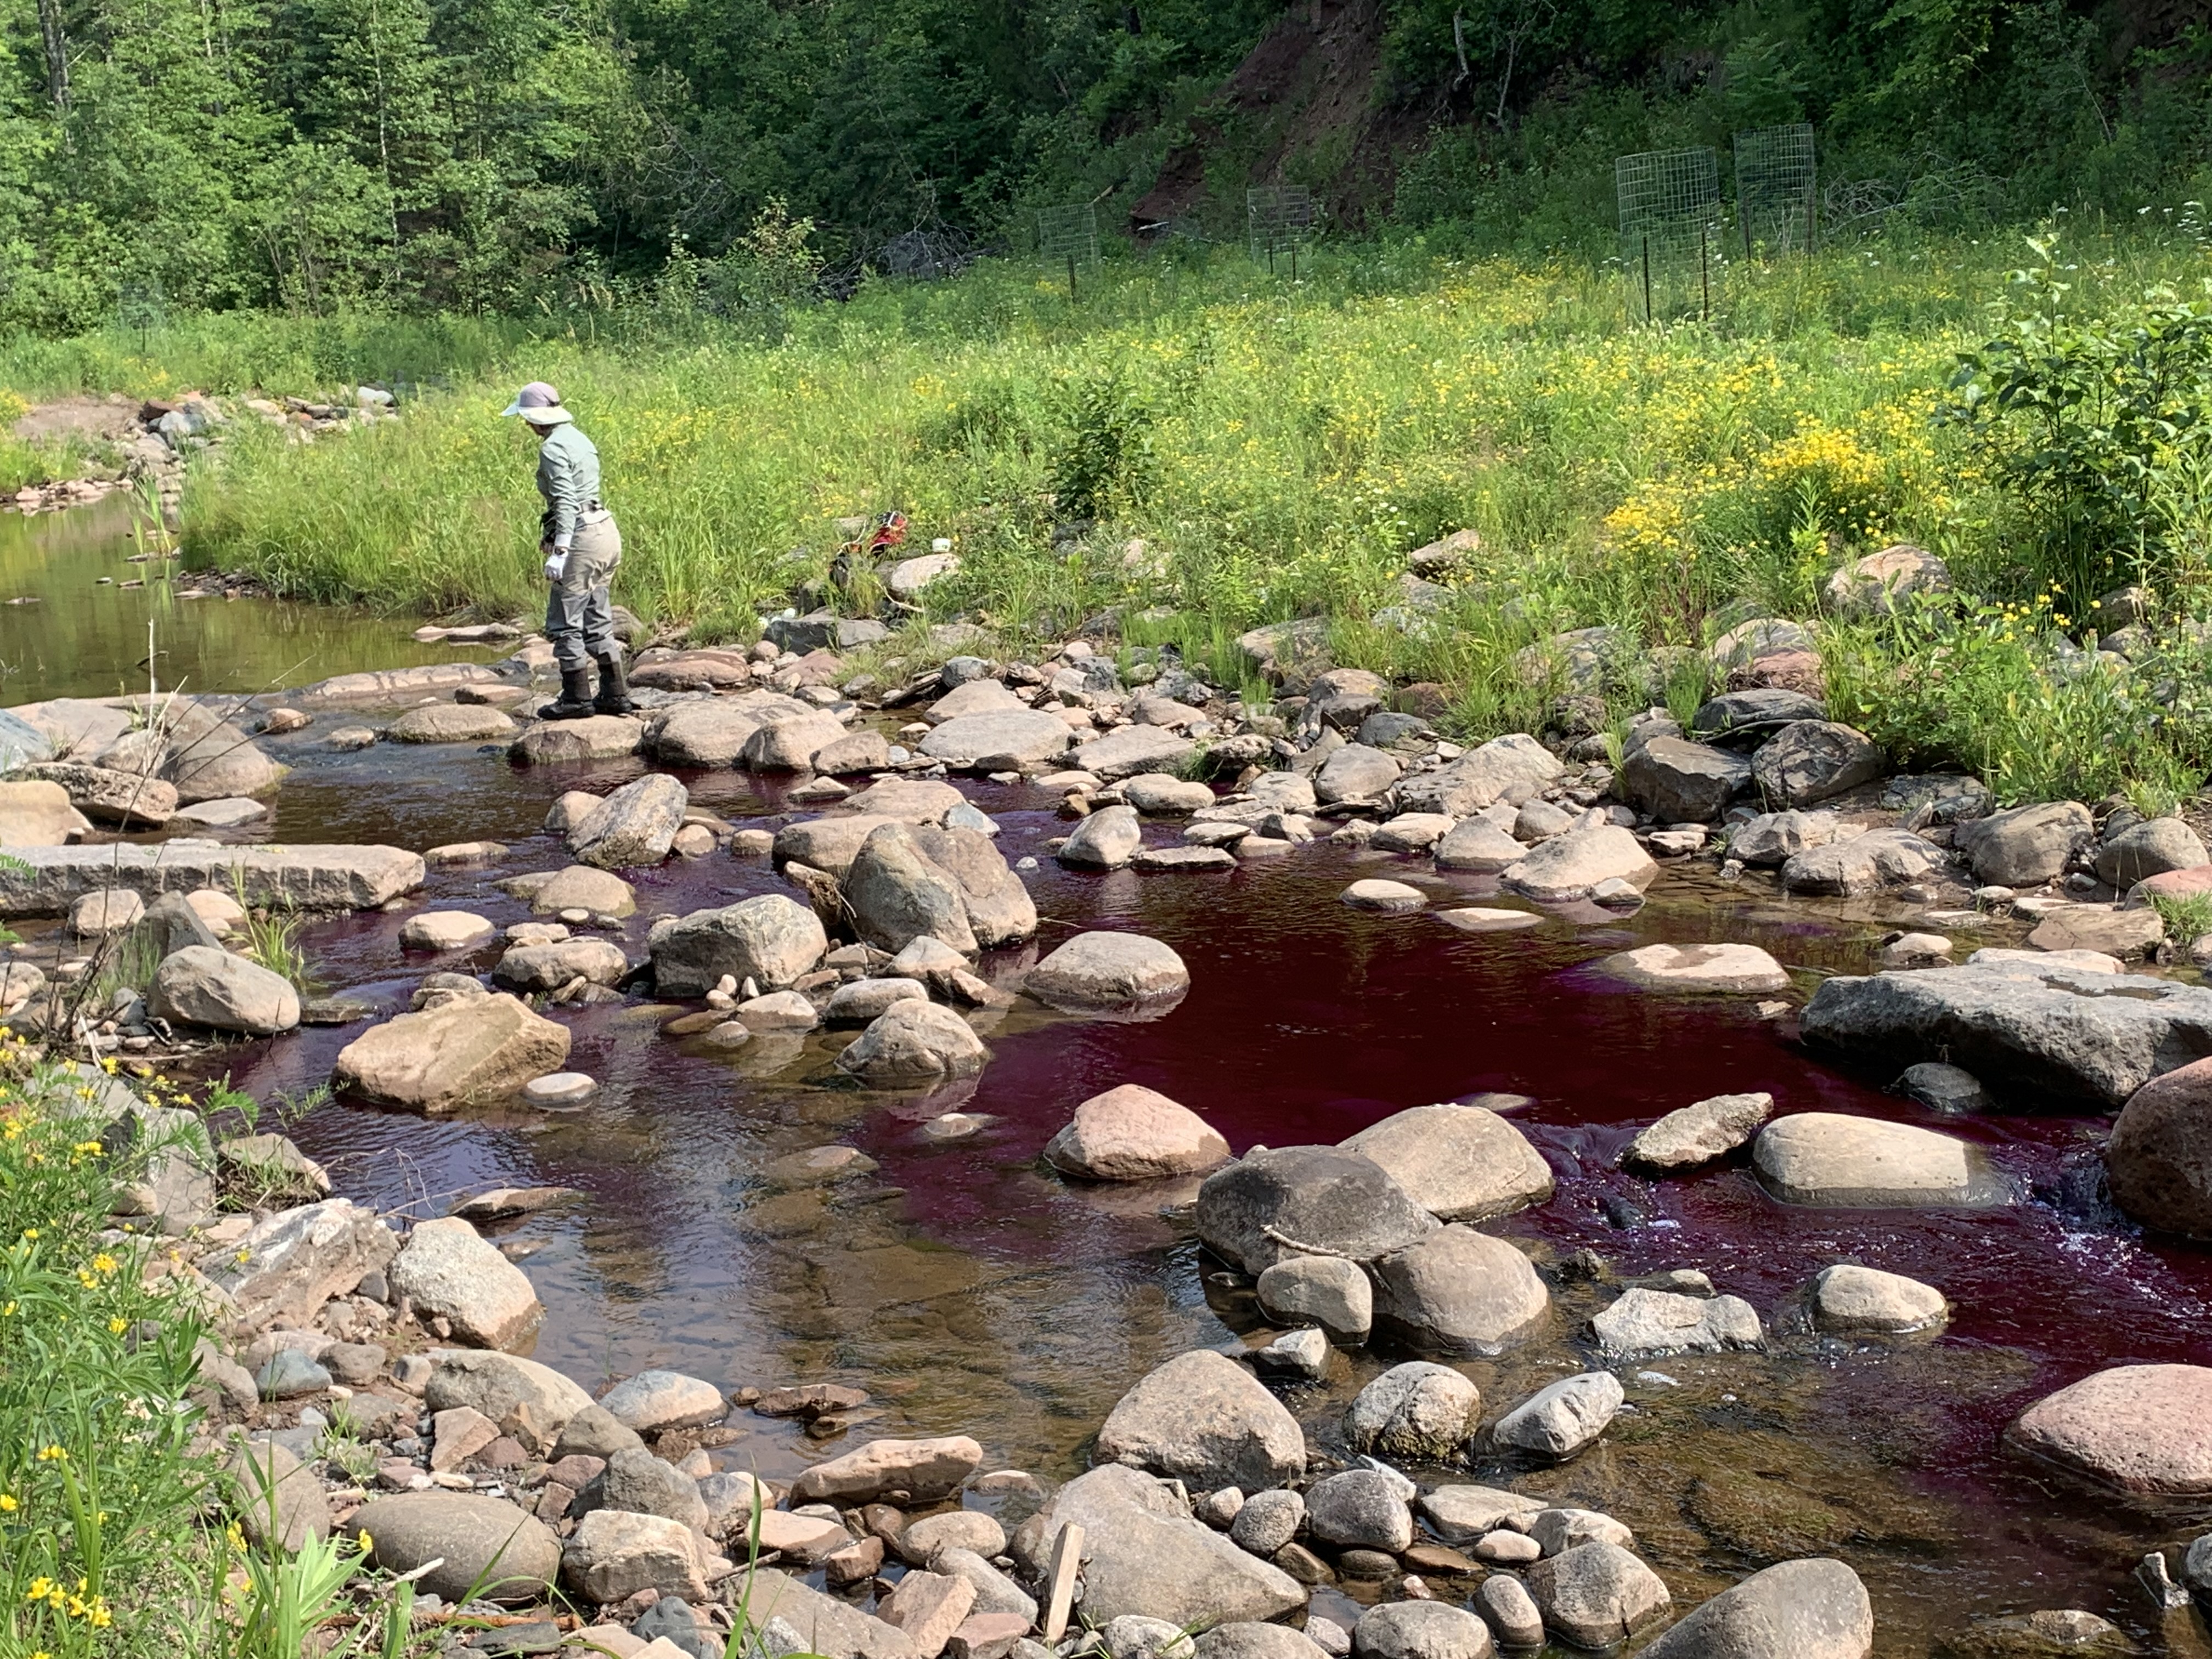 Person stands upstream in middle of a rocky creek. Water is purple.